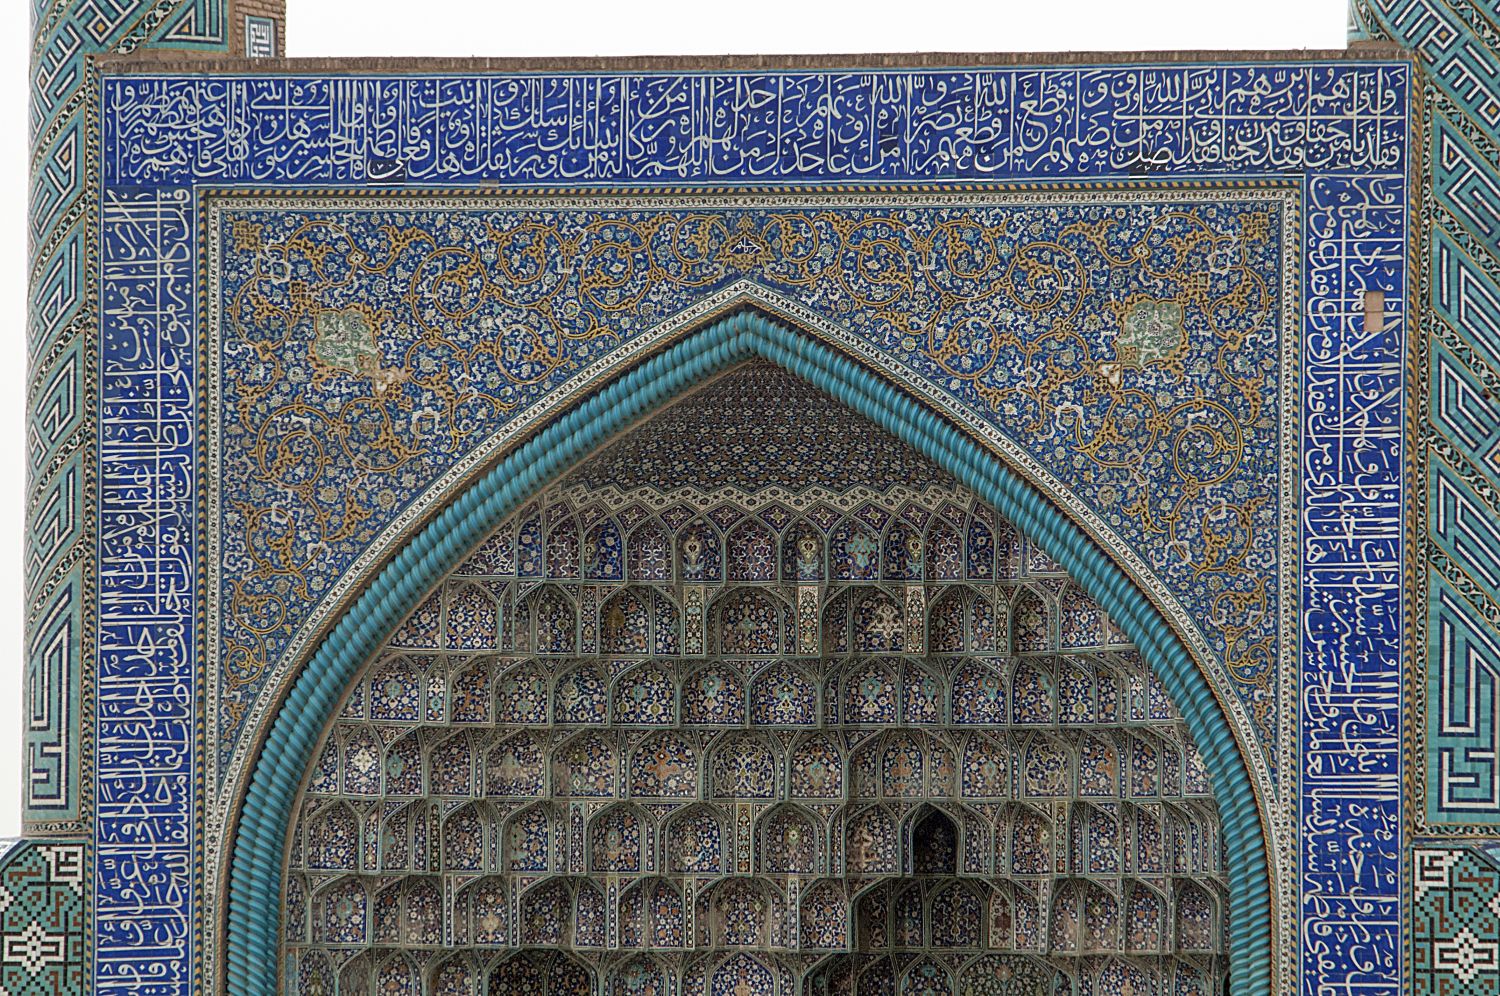 View of facade and vault of entrance portal, showing tilework and muqarnas decoration.